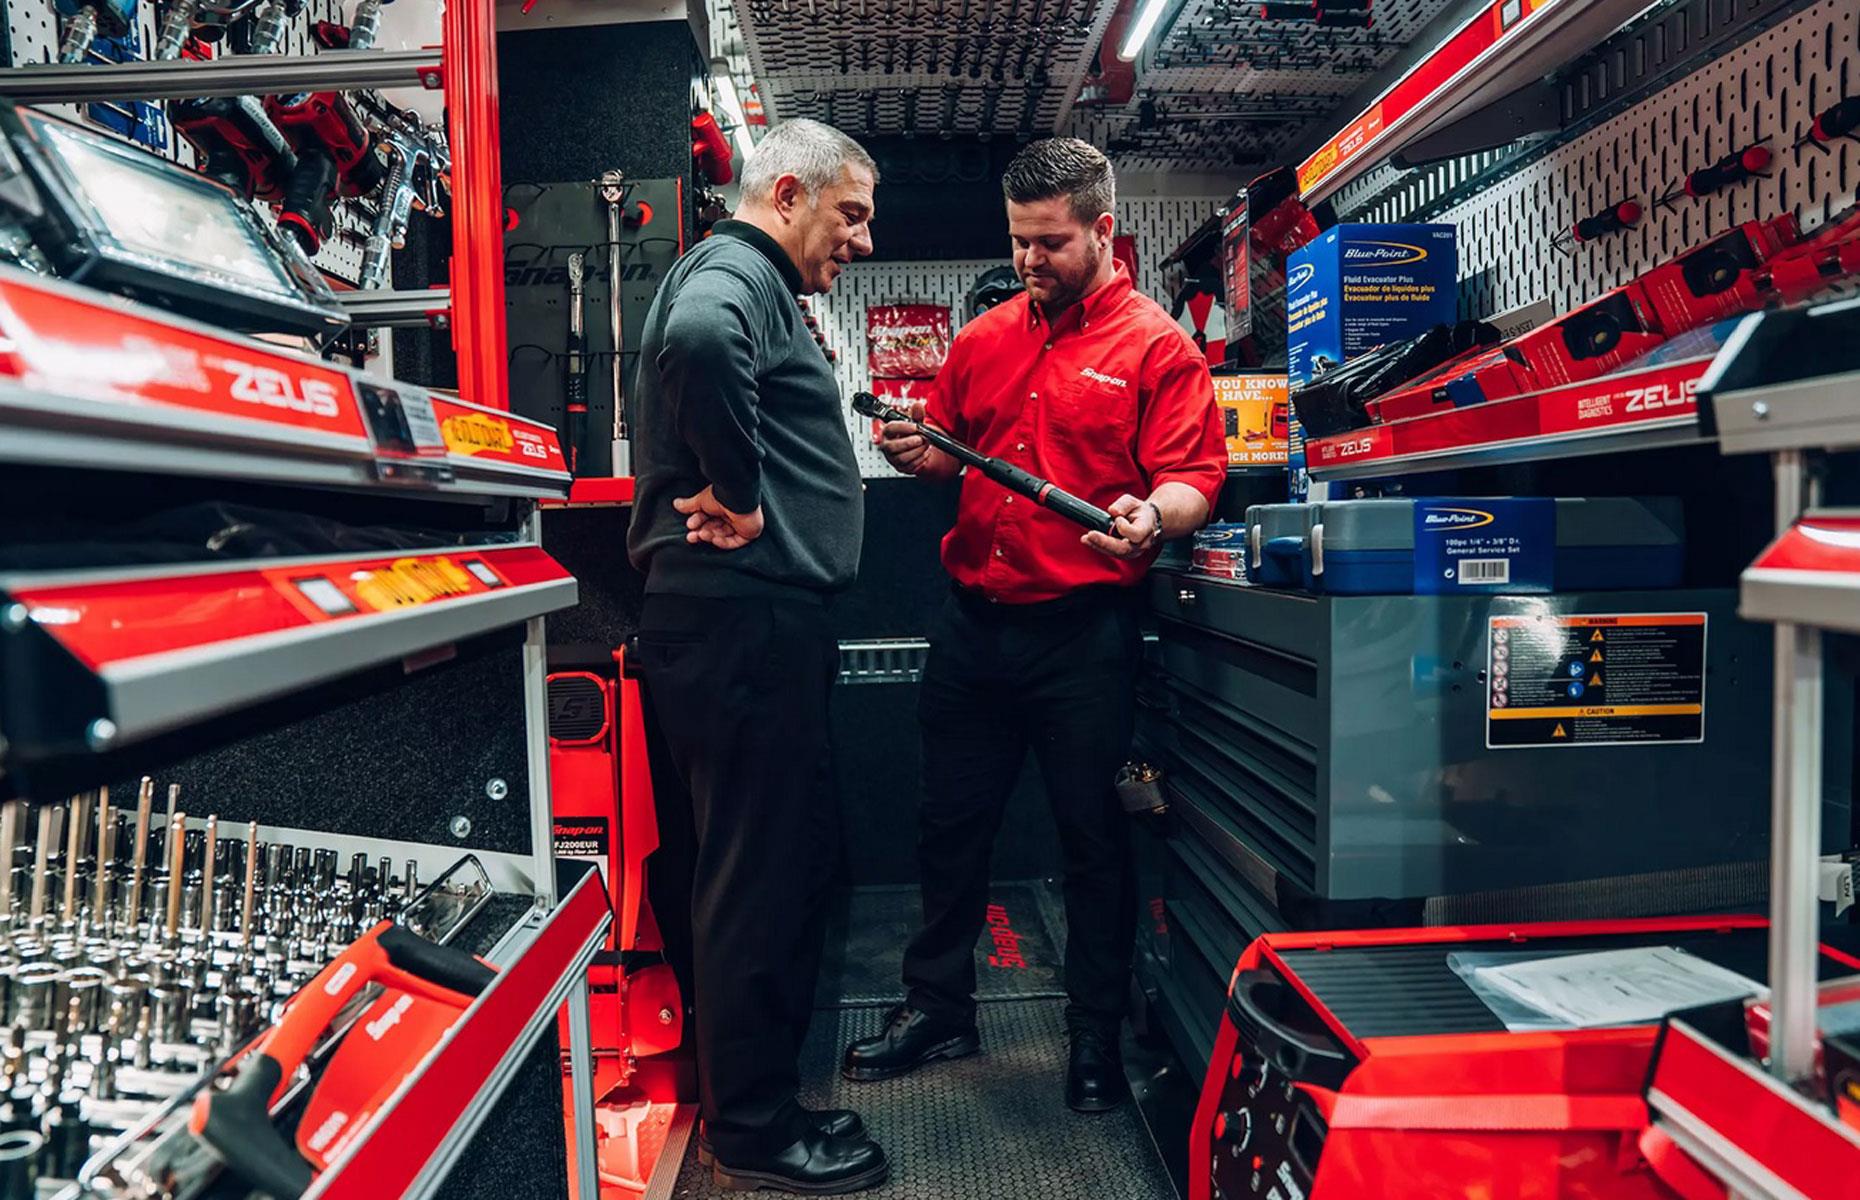 20. Snap-on Tools